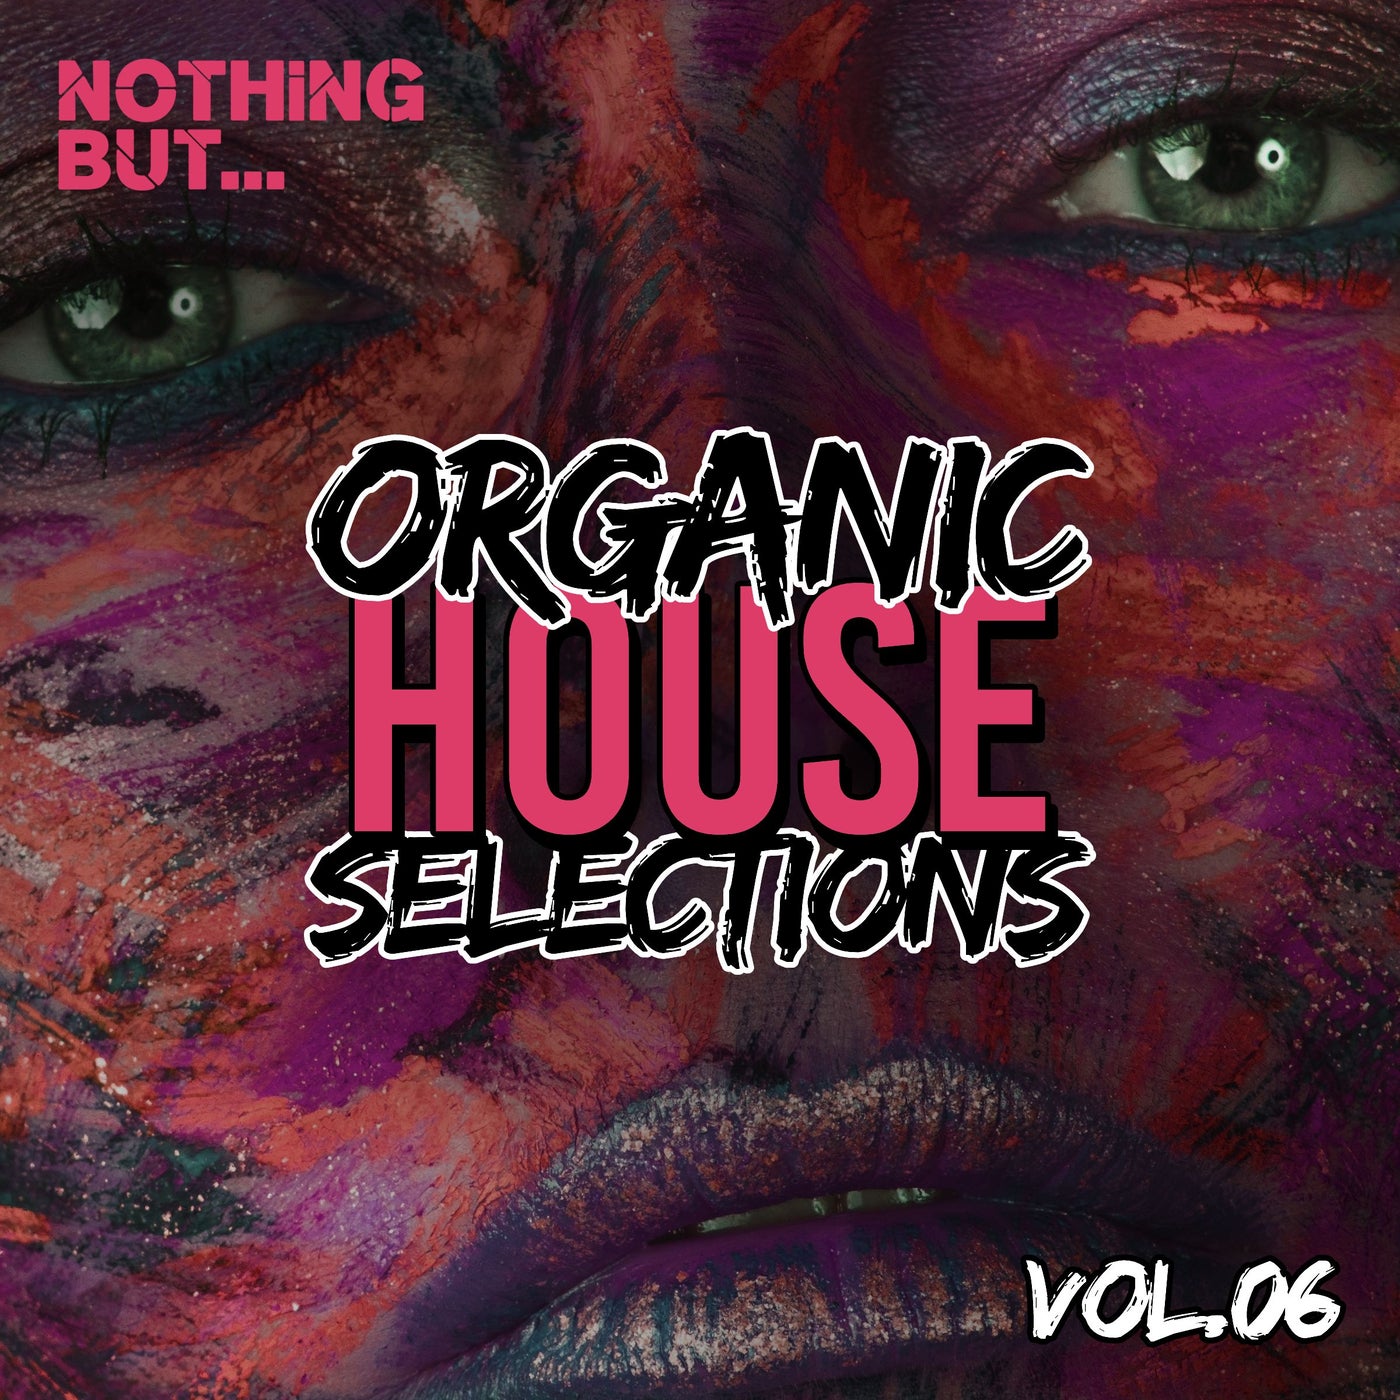 VA – Nothing But… Organic House Selections, Vol. 06 [NBOHS06]